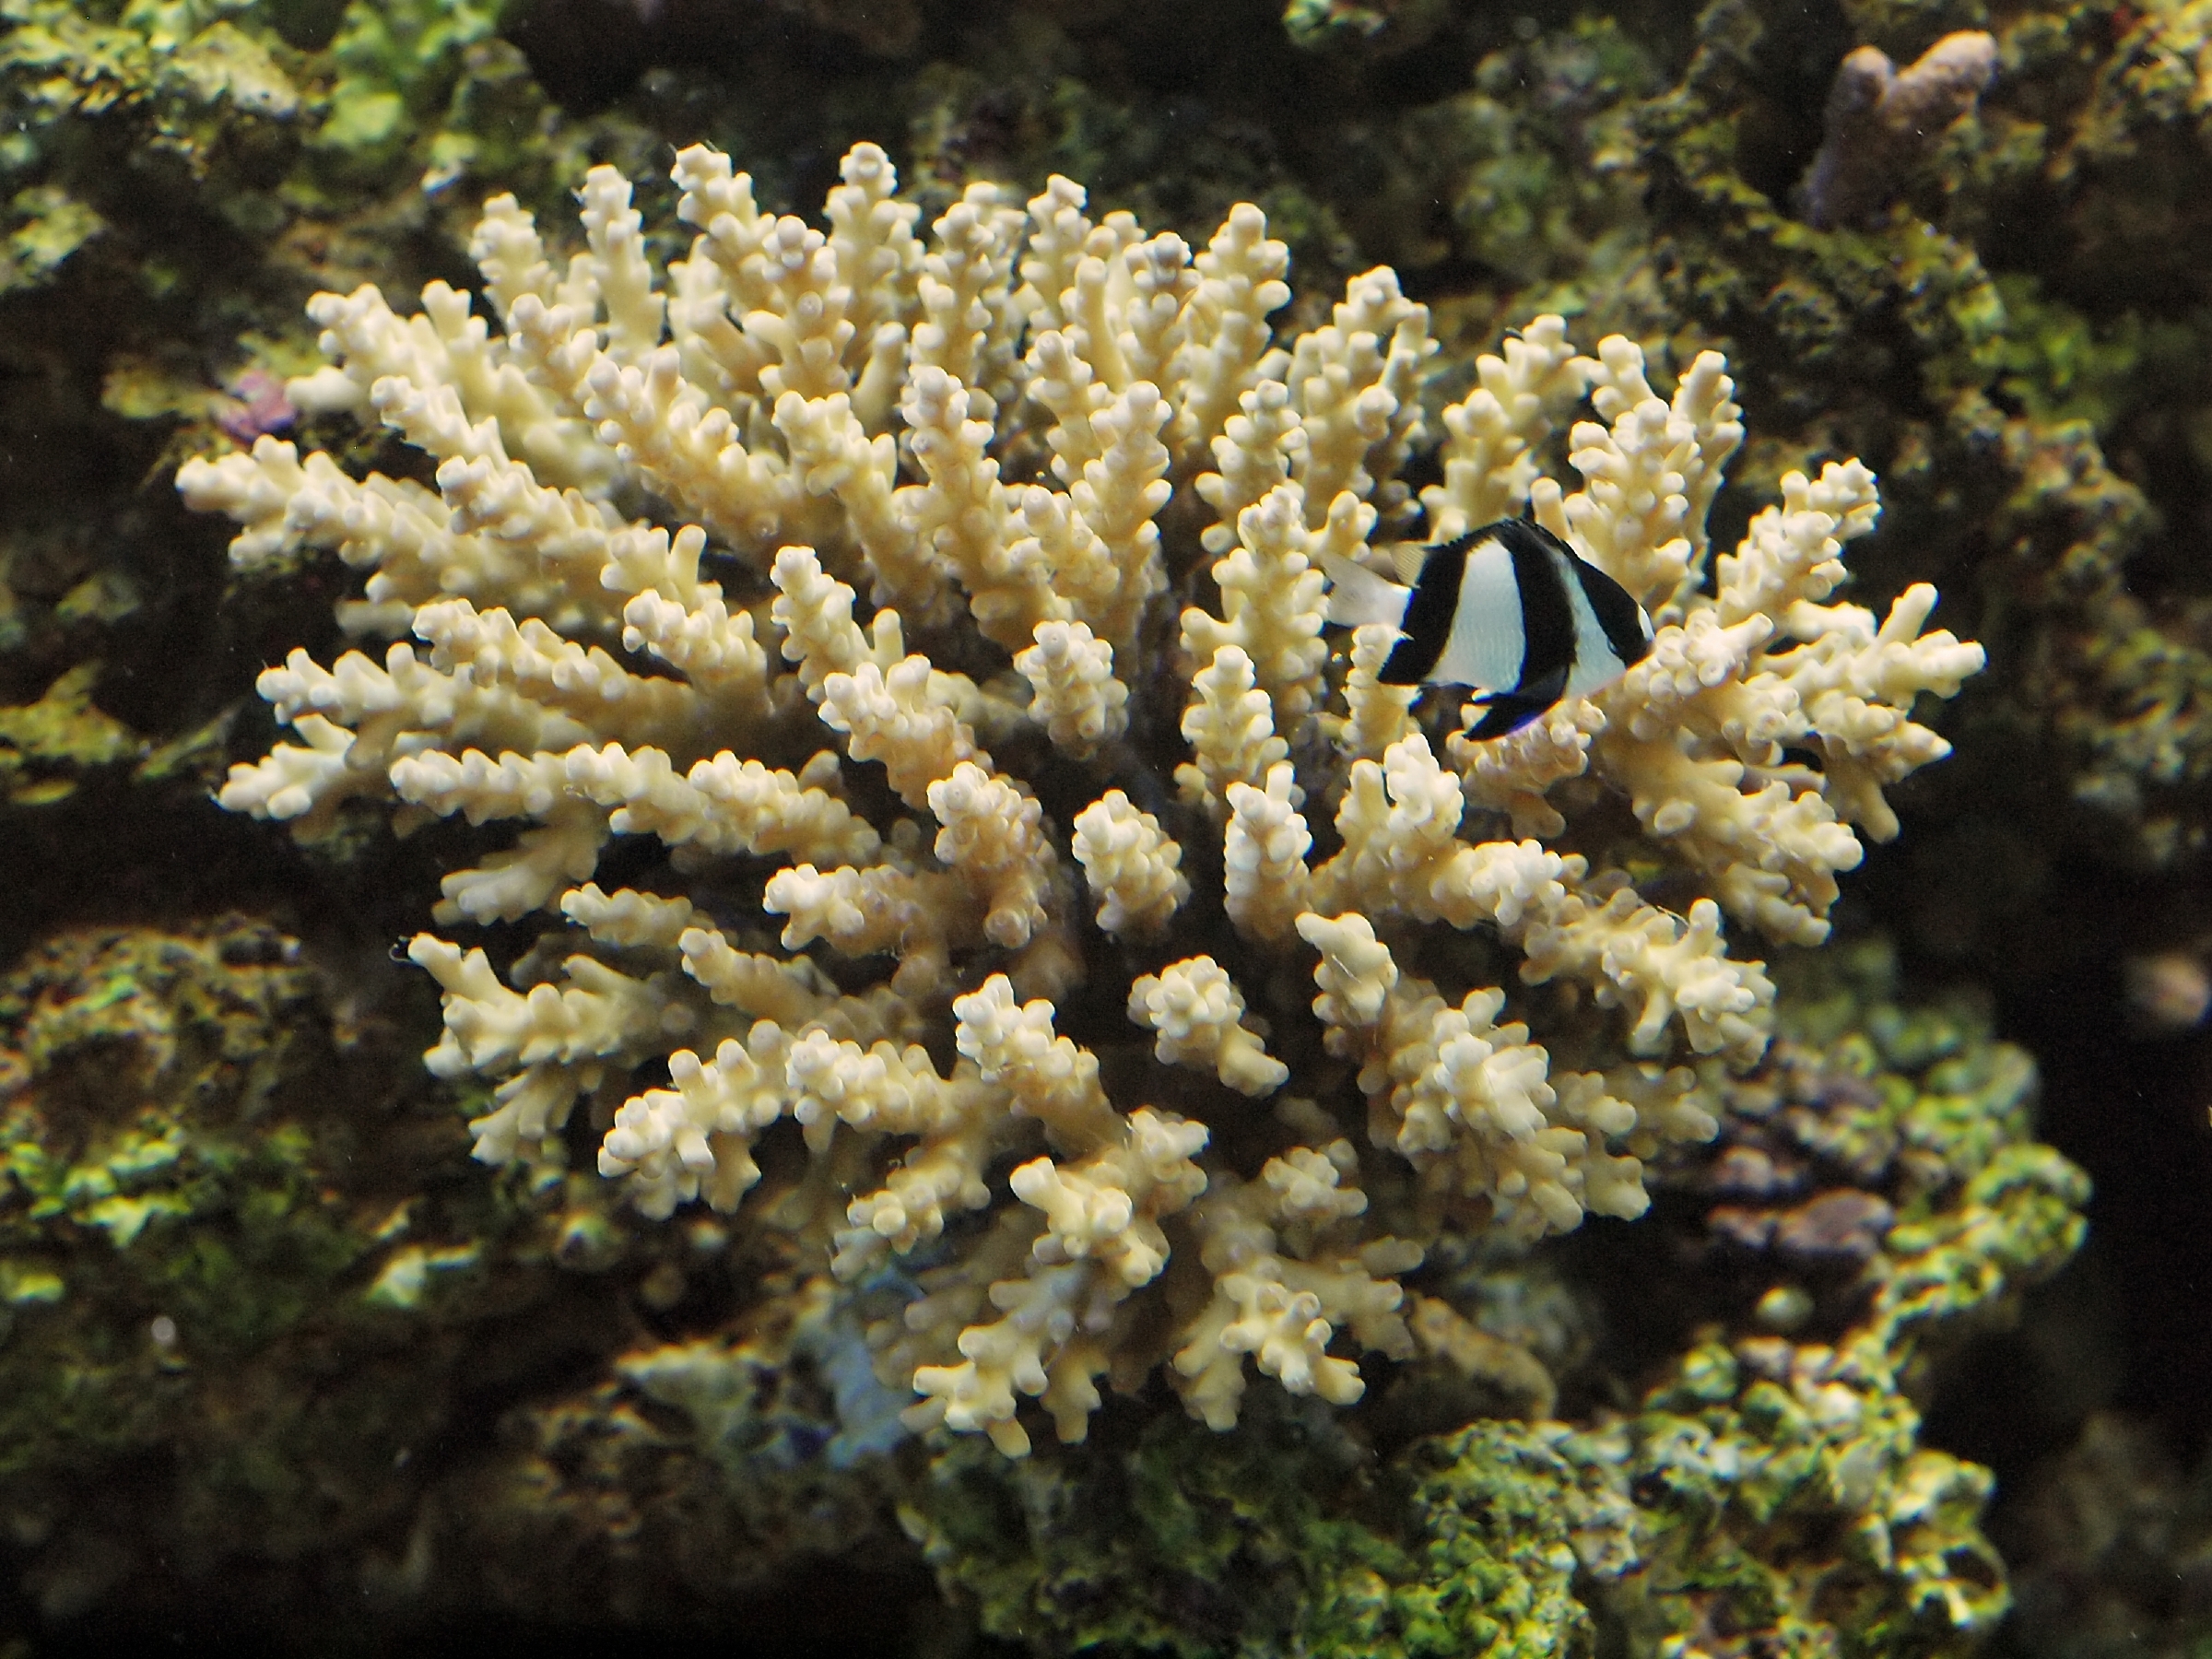 Staghorn coral - Encyclopedia of Life